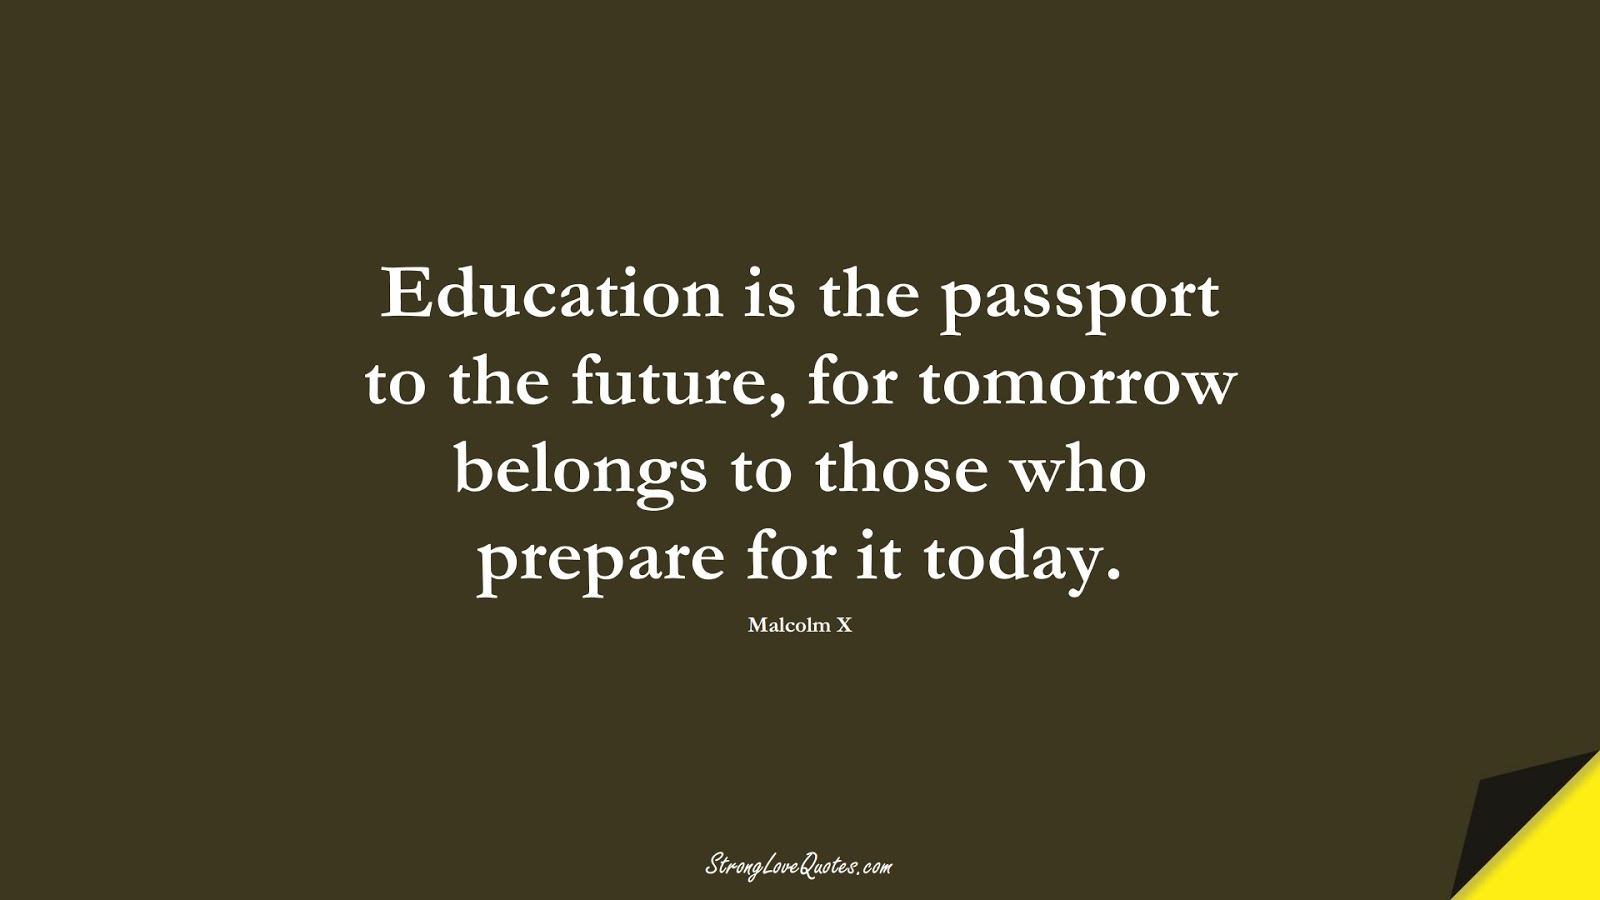 Education is the passport to the future, for tomorrow belongs to those who prepare for it today. (Malcolm X);  #LearningQuotes